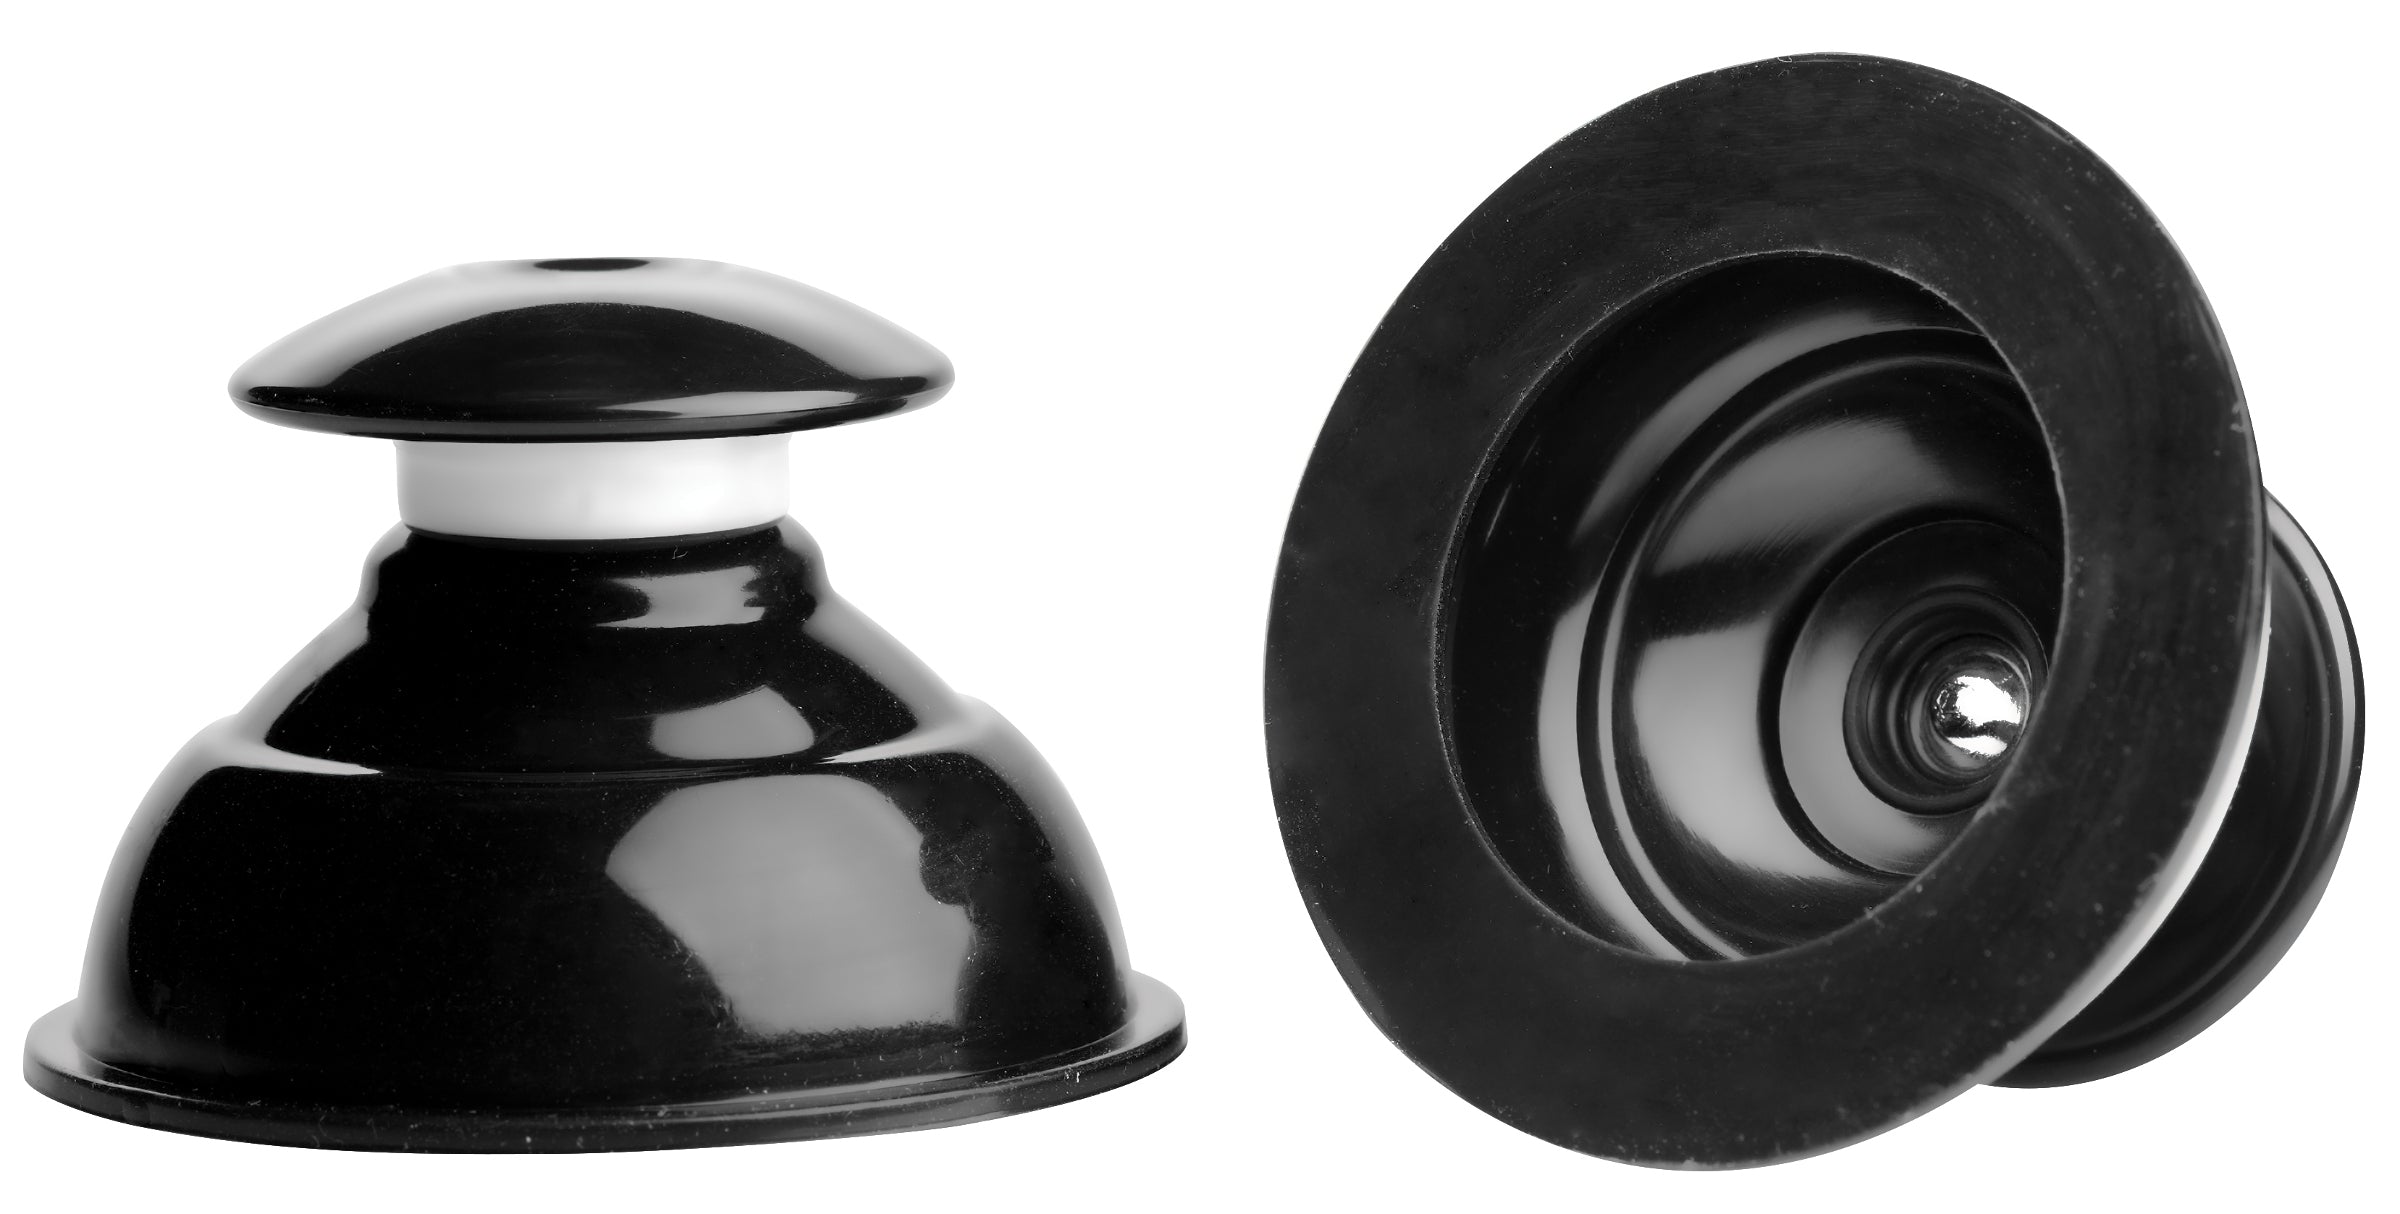 Master Series - Plungers Extreme Suction Nipple  Suckers - Black-2